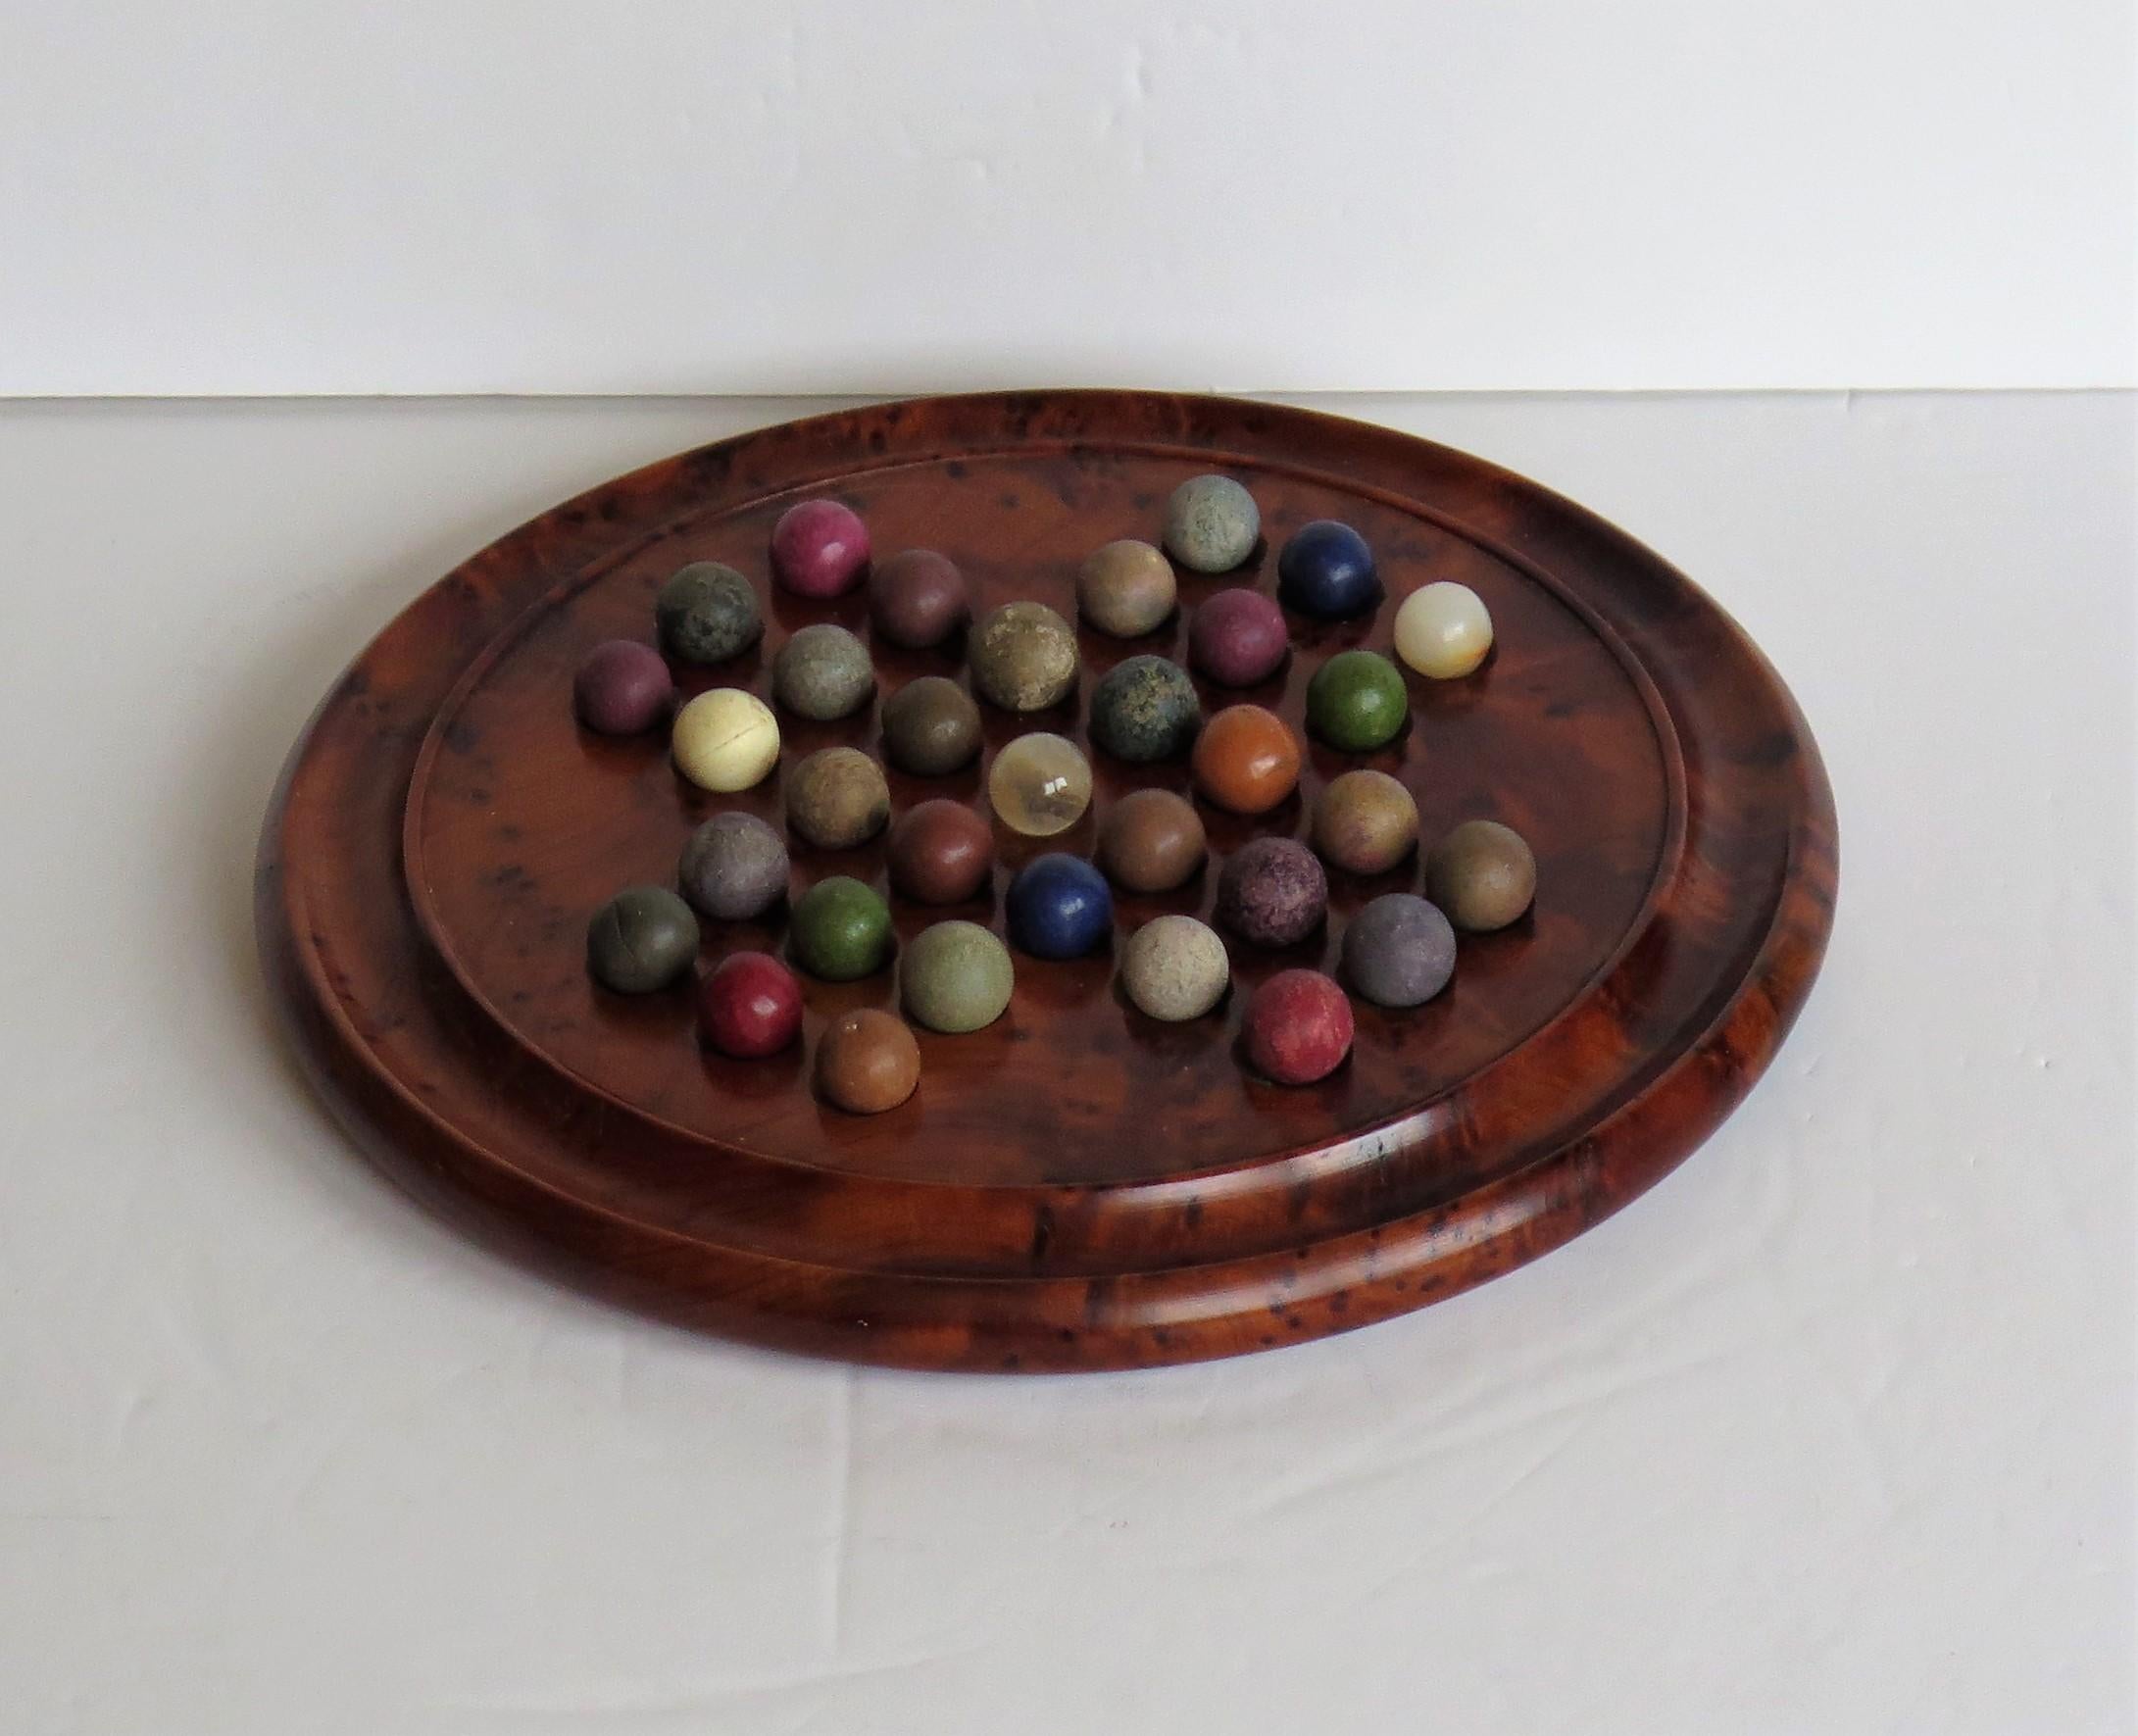 This is a complete board game of marble solitaire from the late 19th century.

The circular turned board is very attractive being made of a burr wood, possibly Maple, with a gallery to the outer perimeter. The board has 32 equi-spaced holes with